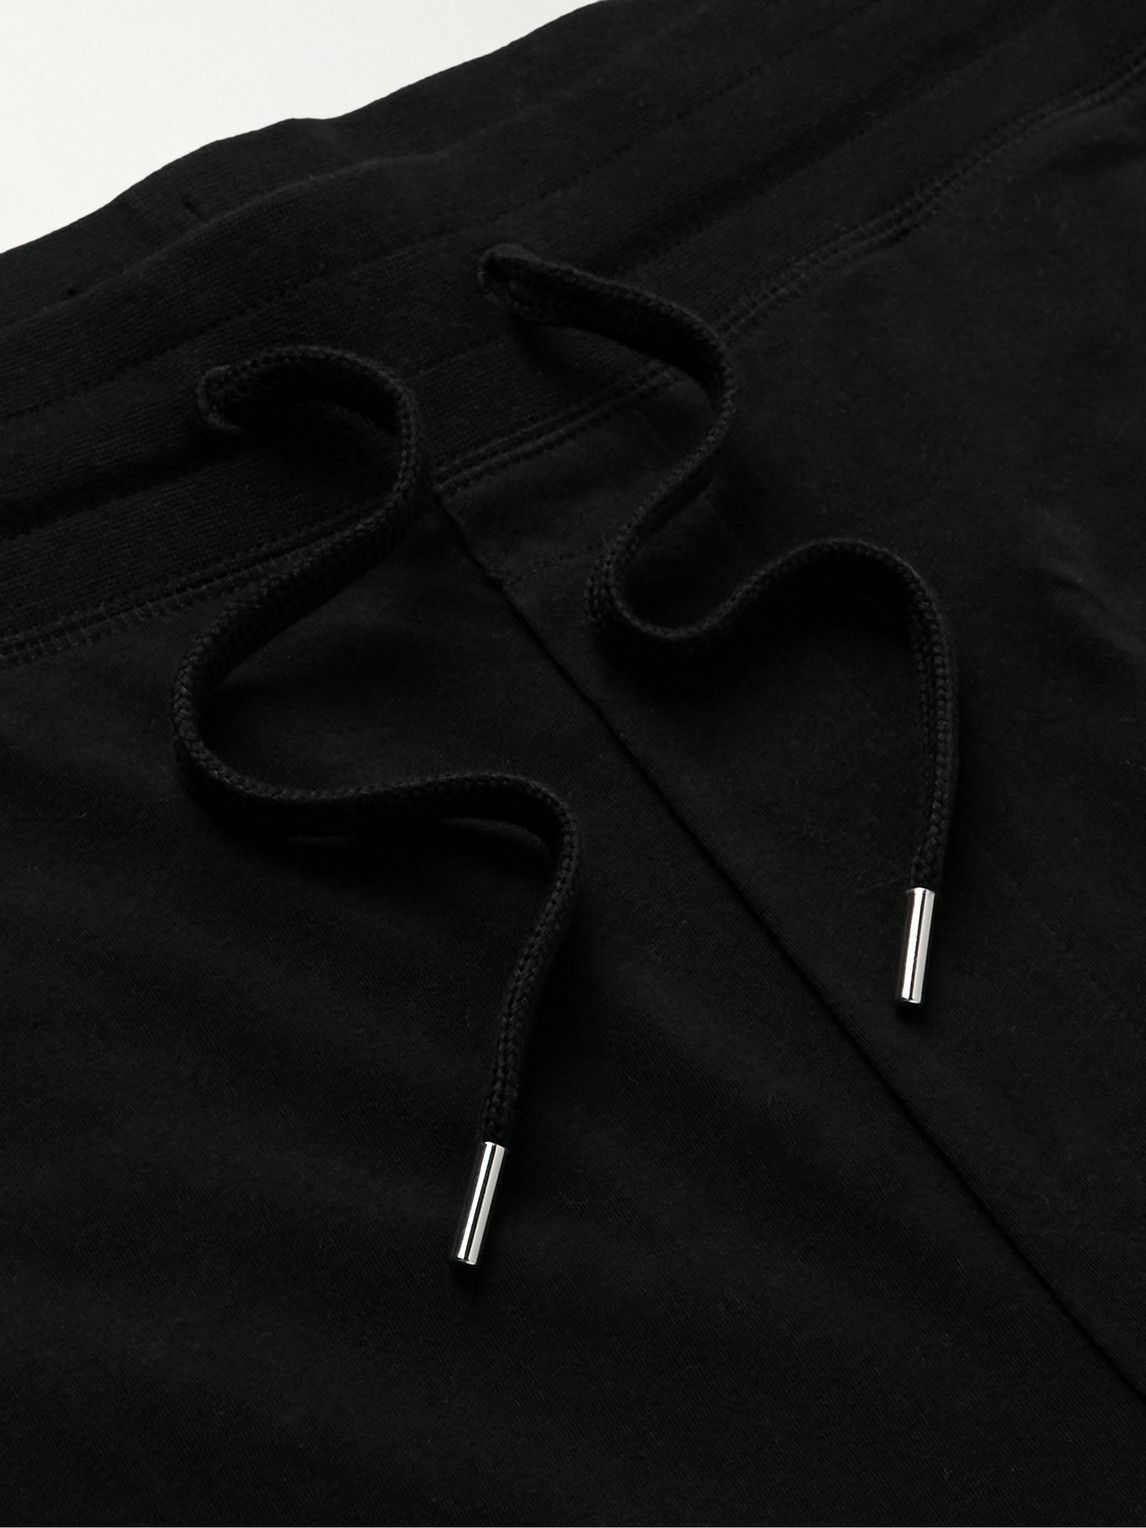 Paul Smith - Tapered Webbing-Trimmed Cotton-Jersey Sweatpants - Black ...